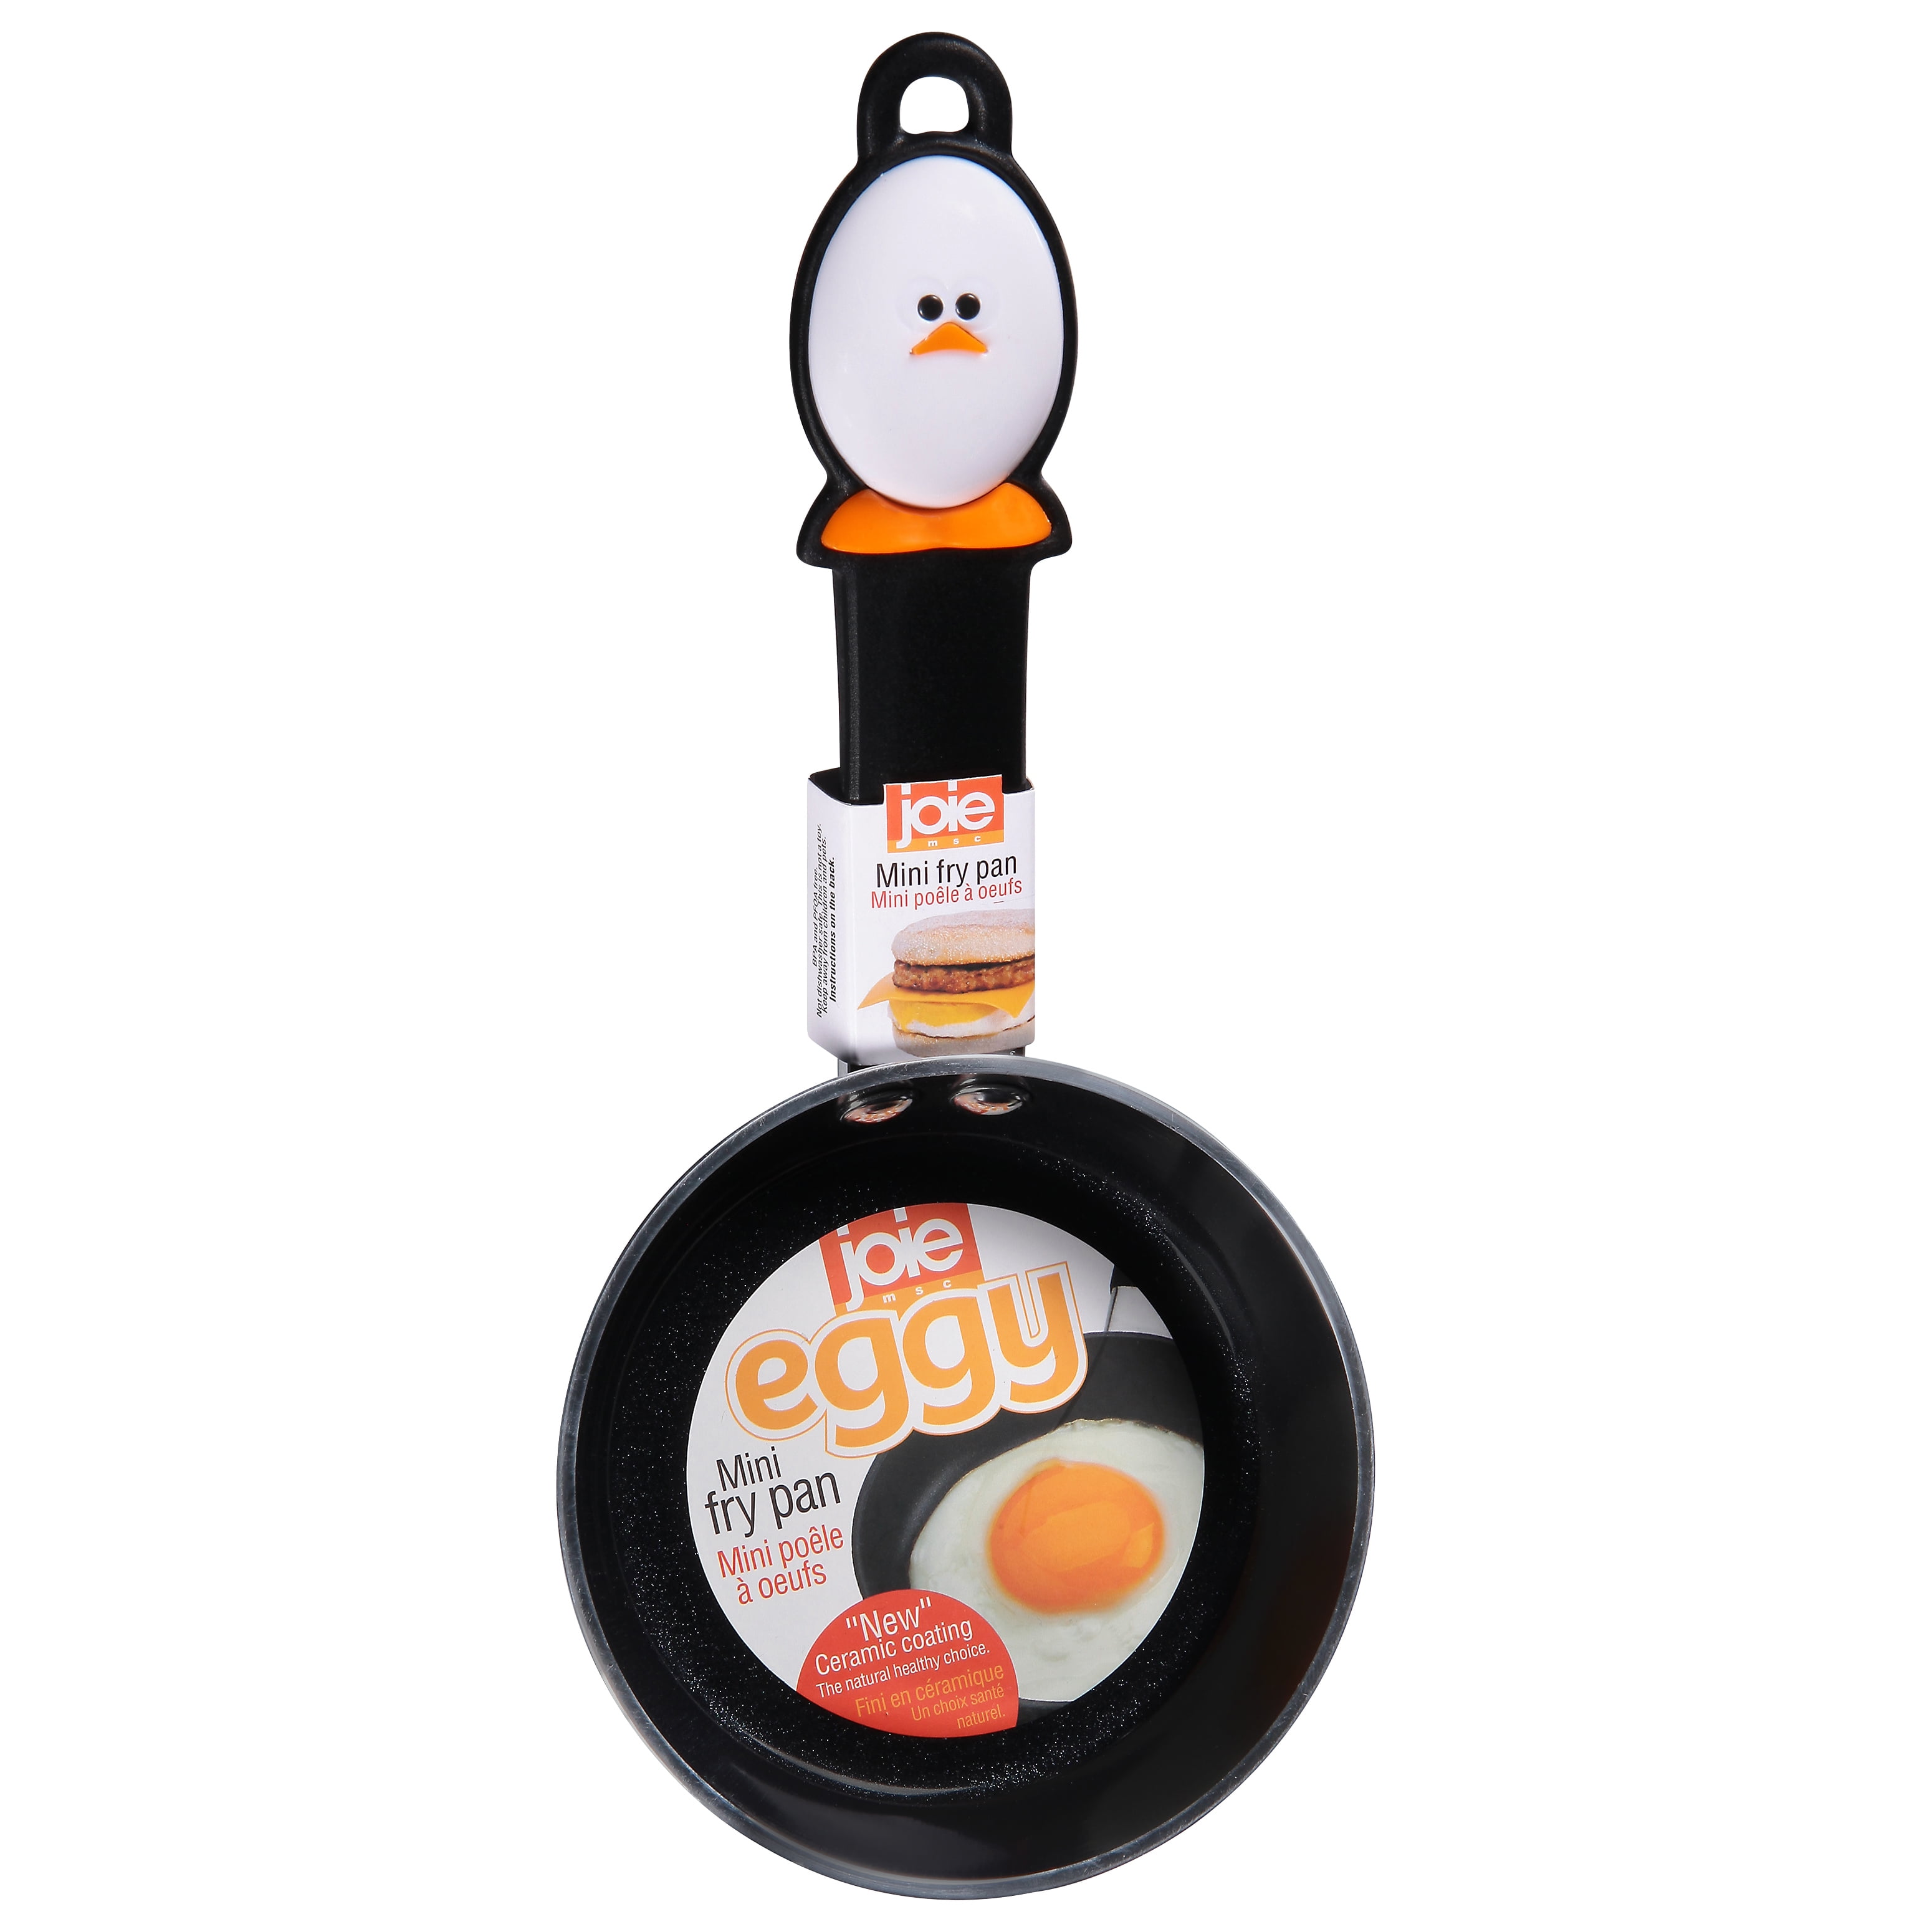 Mini Frying Pan For One Egg, 4.7 12cm Mini Egg Frying Pan With